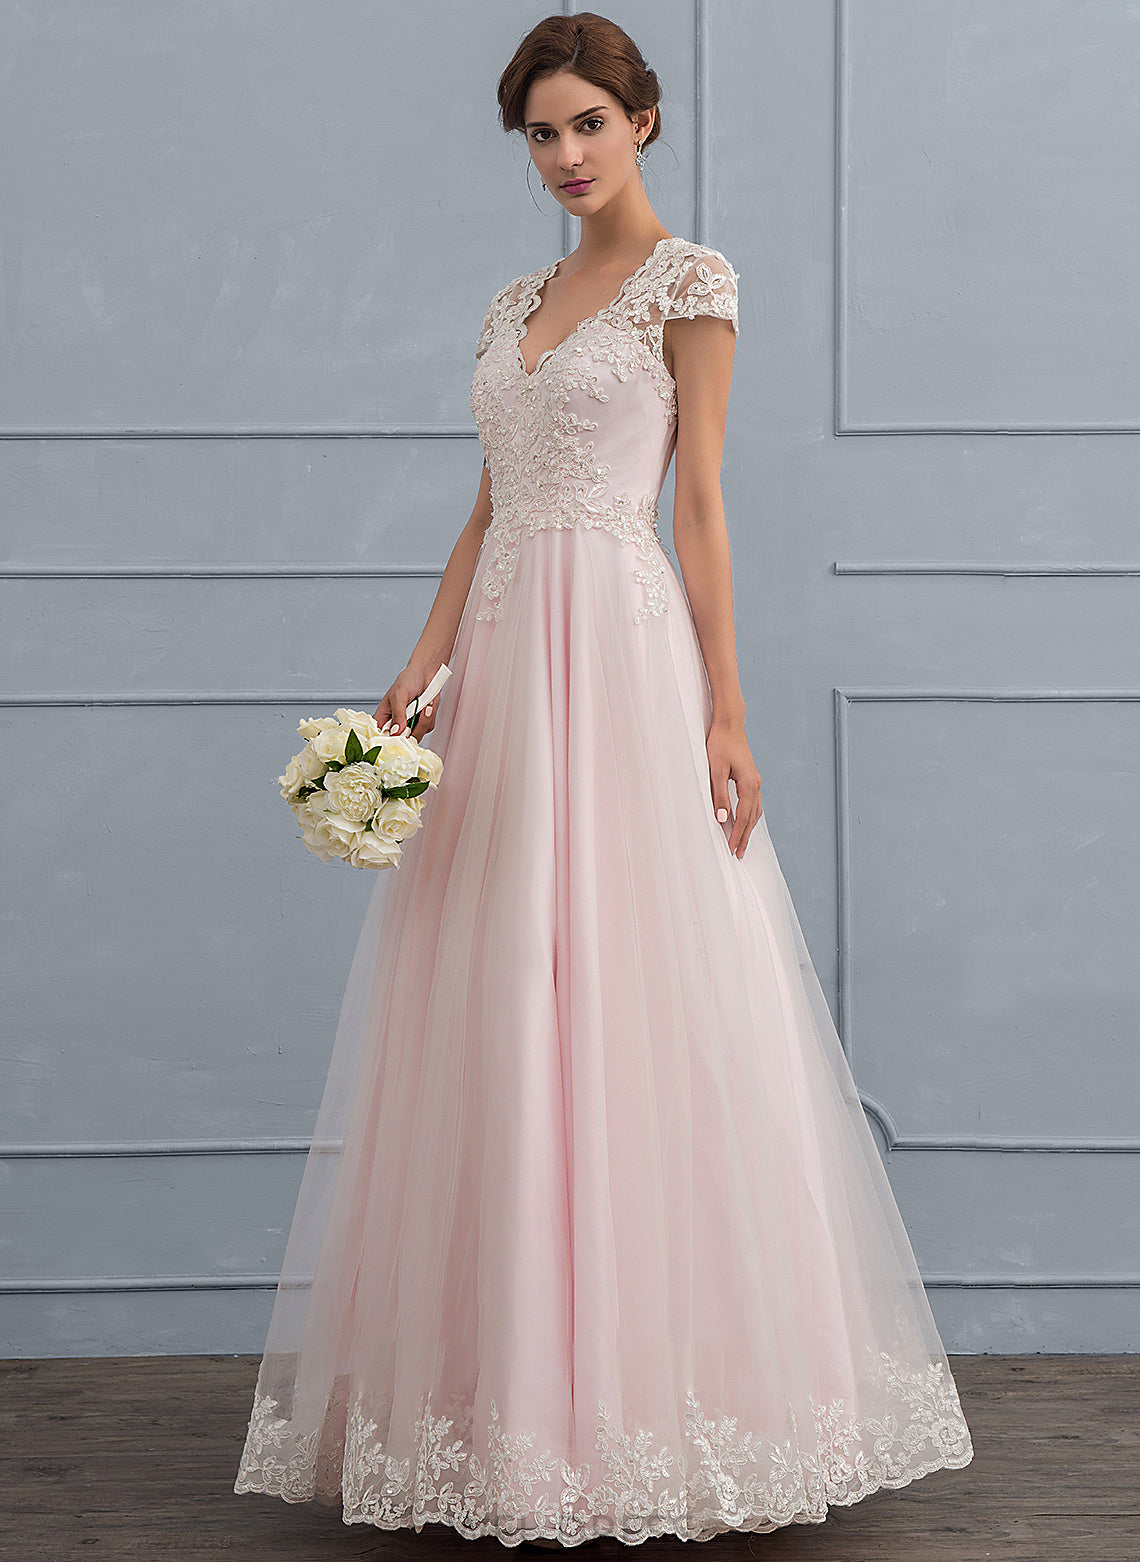 Tulle Dress Beading Angelique With V-neck Floor-Length Wedding Dresses Sequins Ball-Gown/Princess Wedding